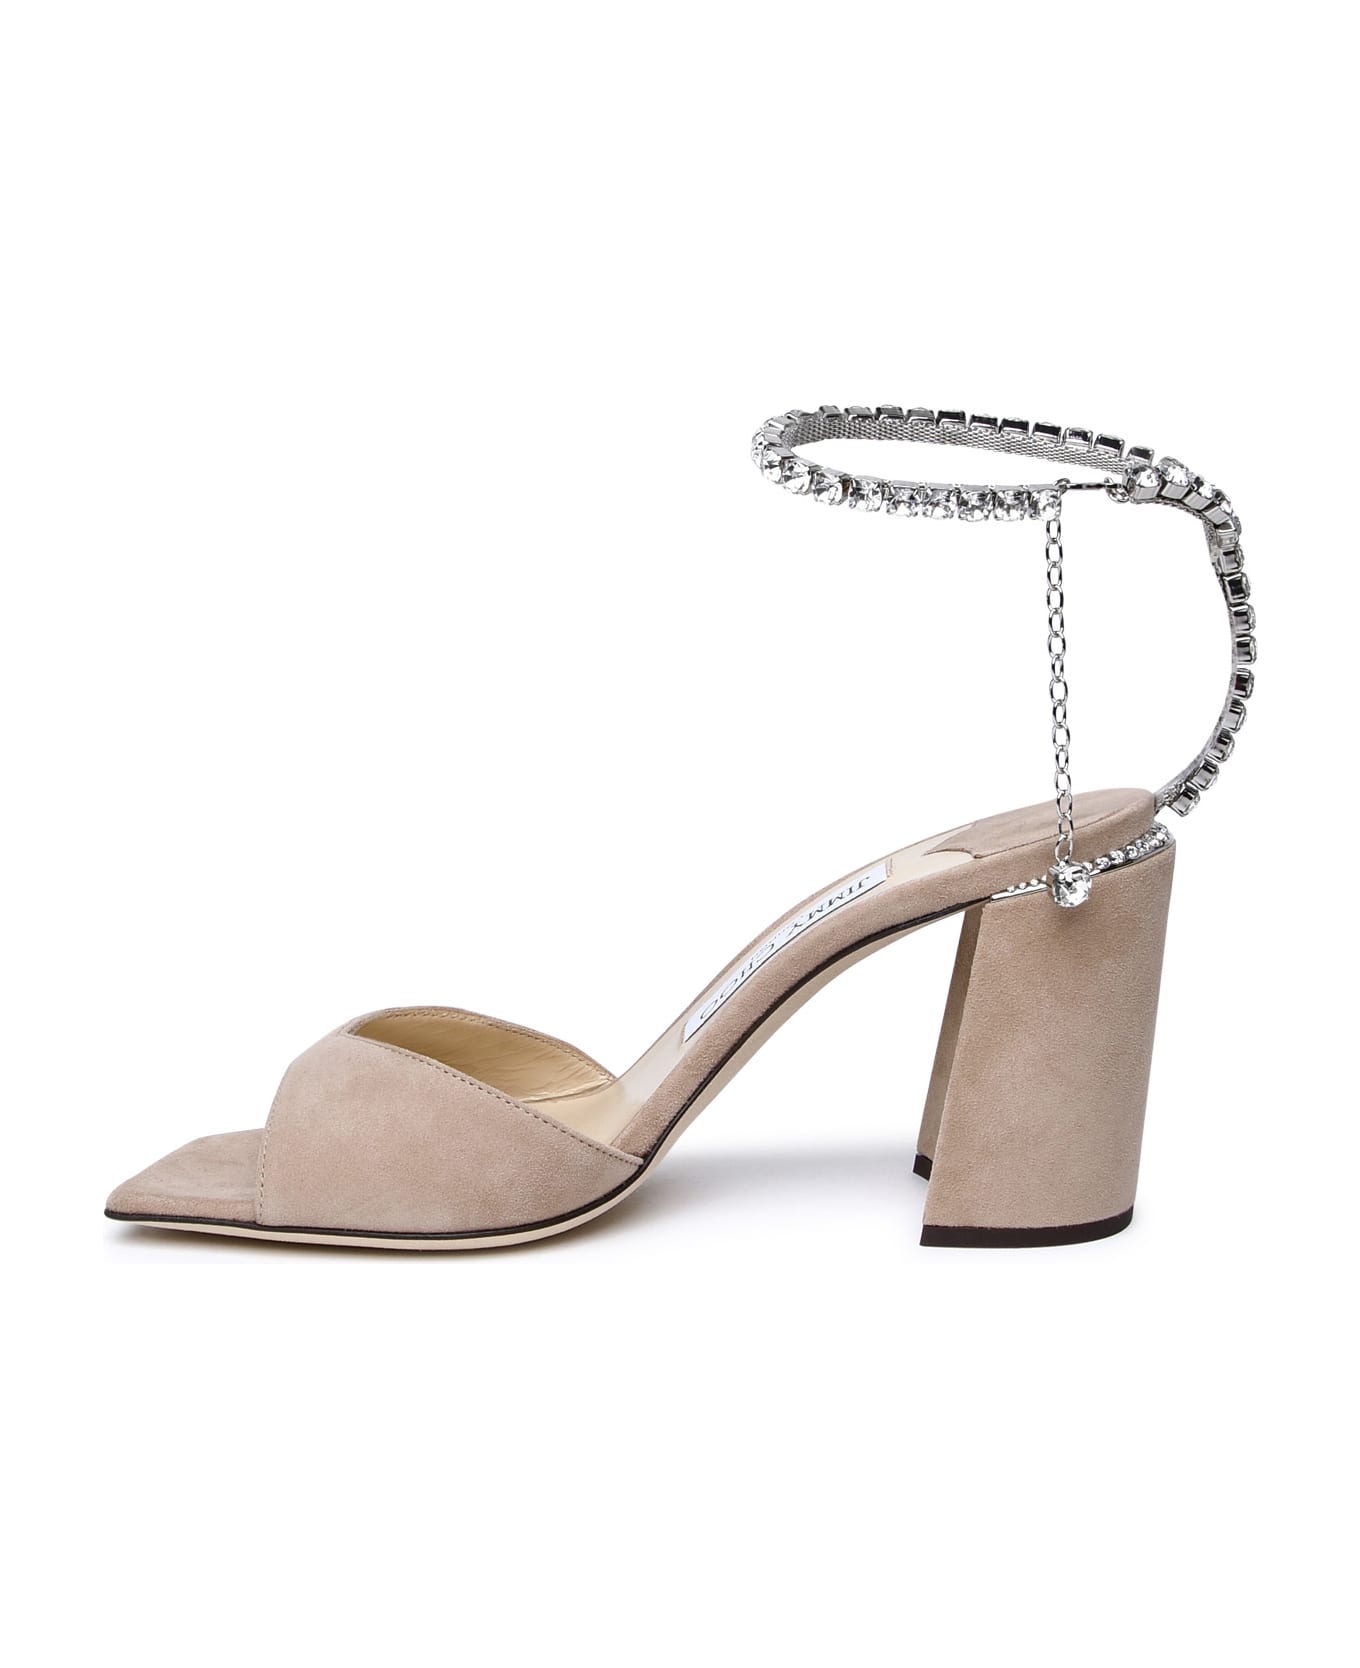 Jimmy Choo Suede Sandals Nude - Pink サンダル